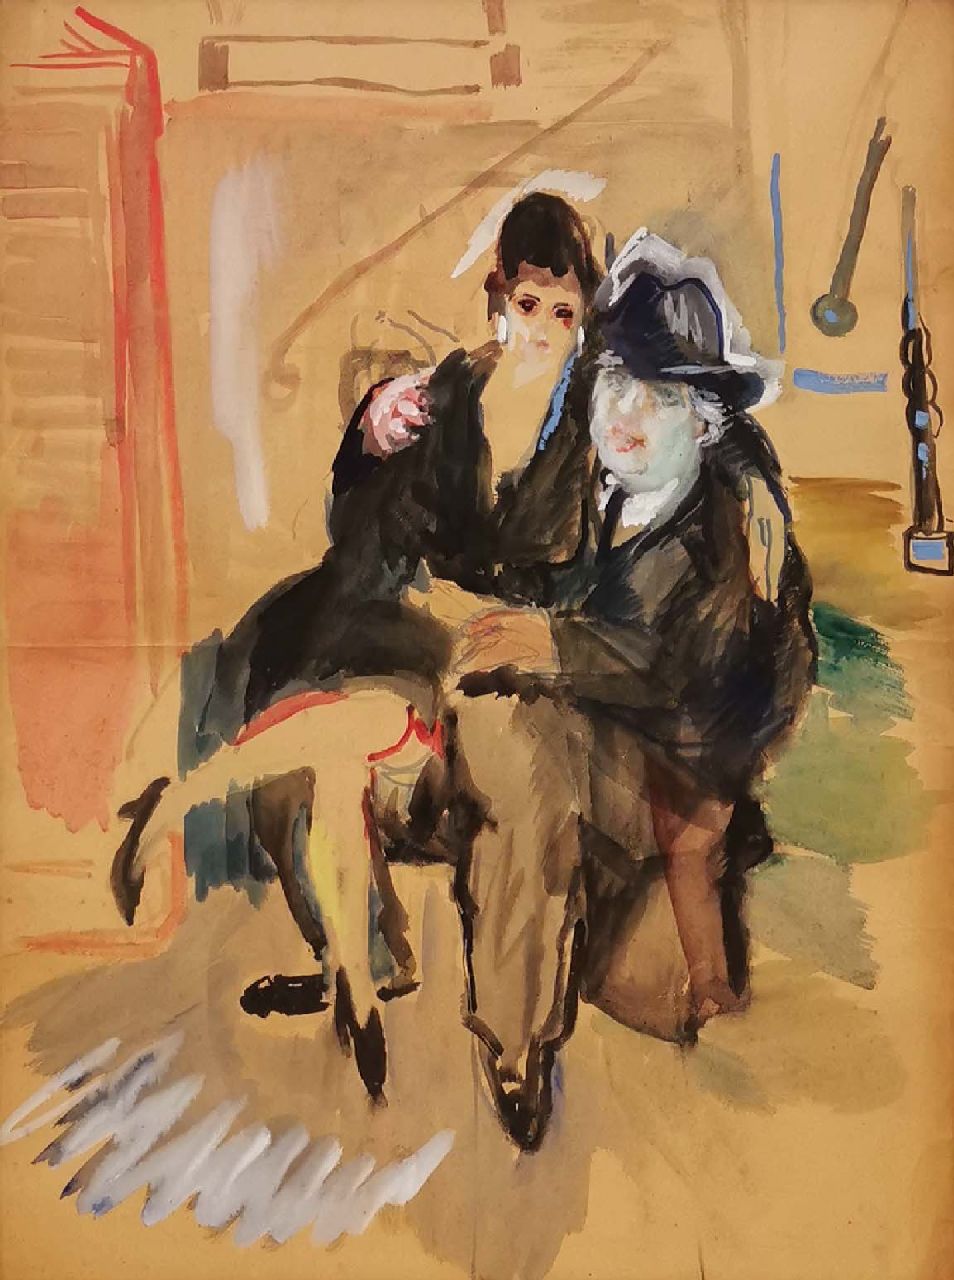 Martens G.G.  | Gijsbert 'George' Martens | Watercolours and drawings offered for sale | A couple on a chair, gouache on paper 85.6 x 64.6 cm